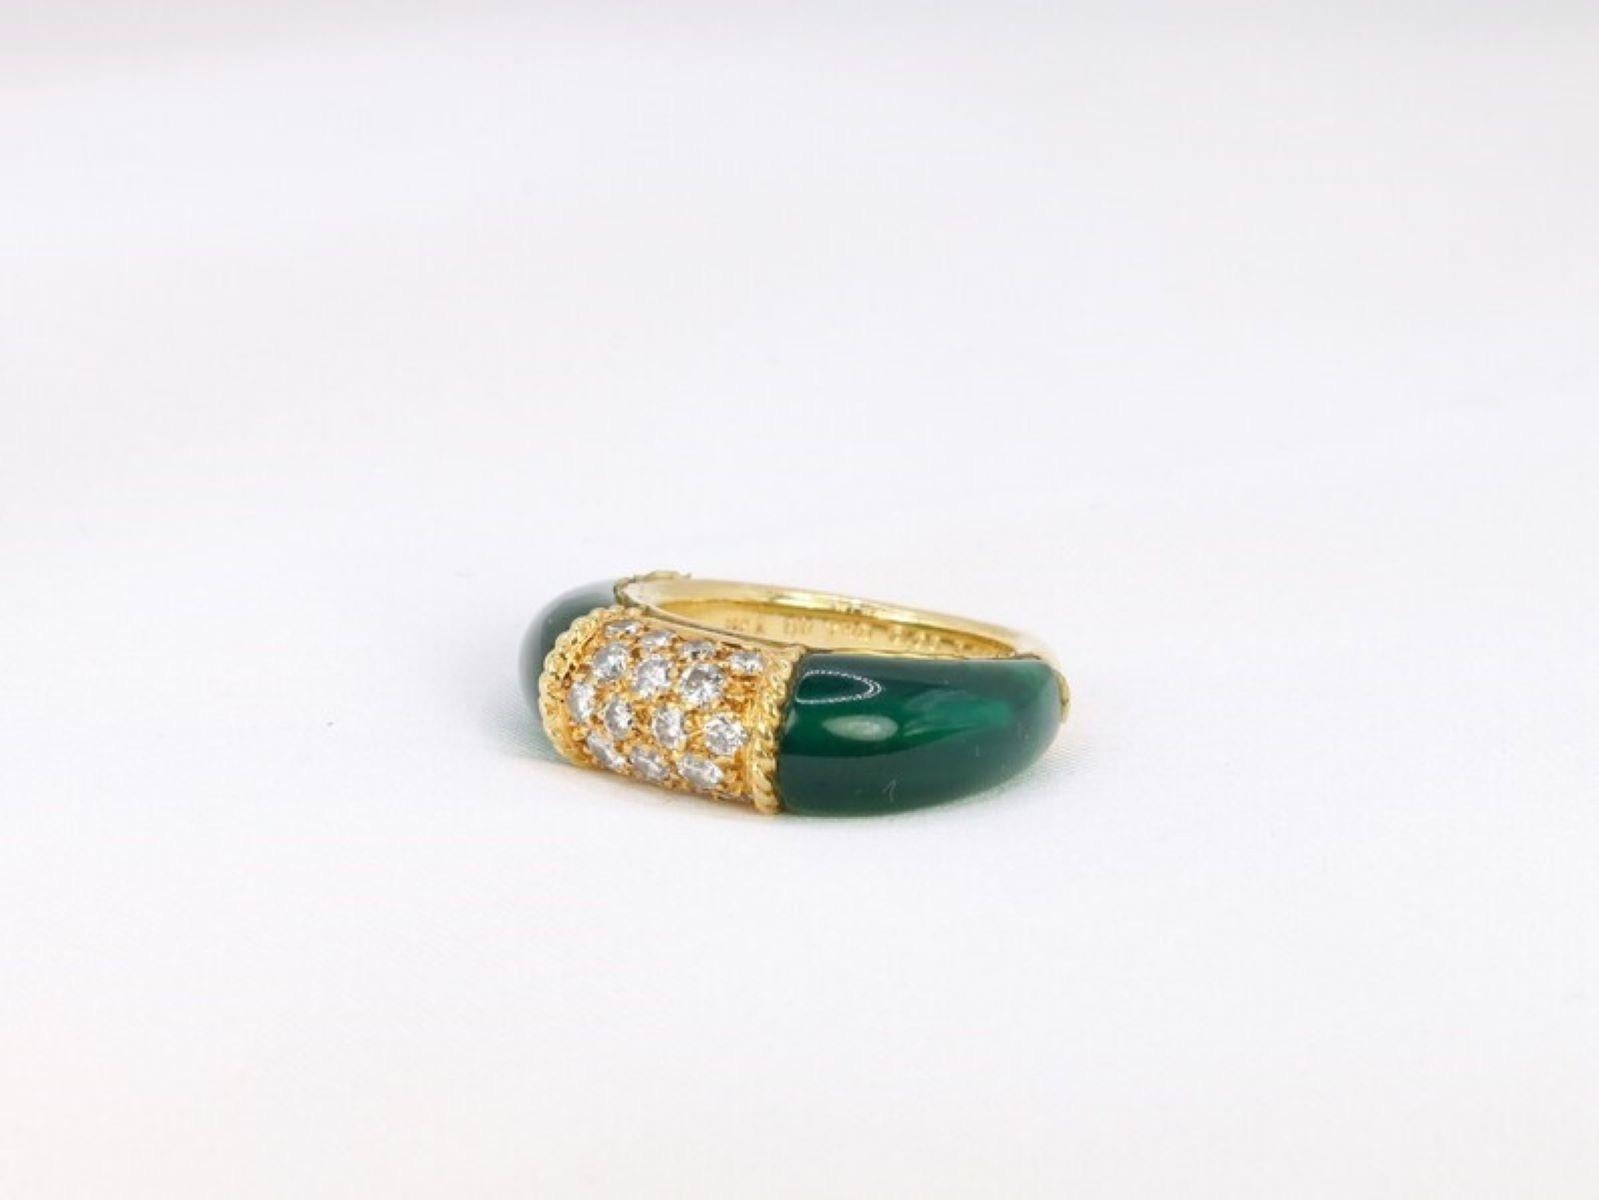 Brilliant Cut  Rare Van Cleef & Arpels Chrysoprase and Diamond Ring Set in 18ct Yellow Gold For Sale